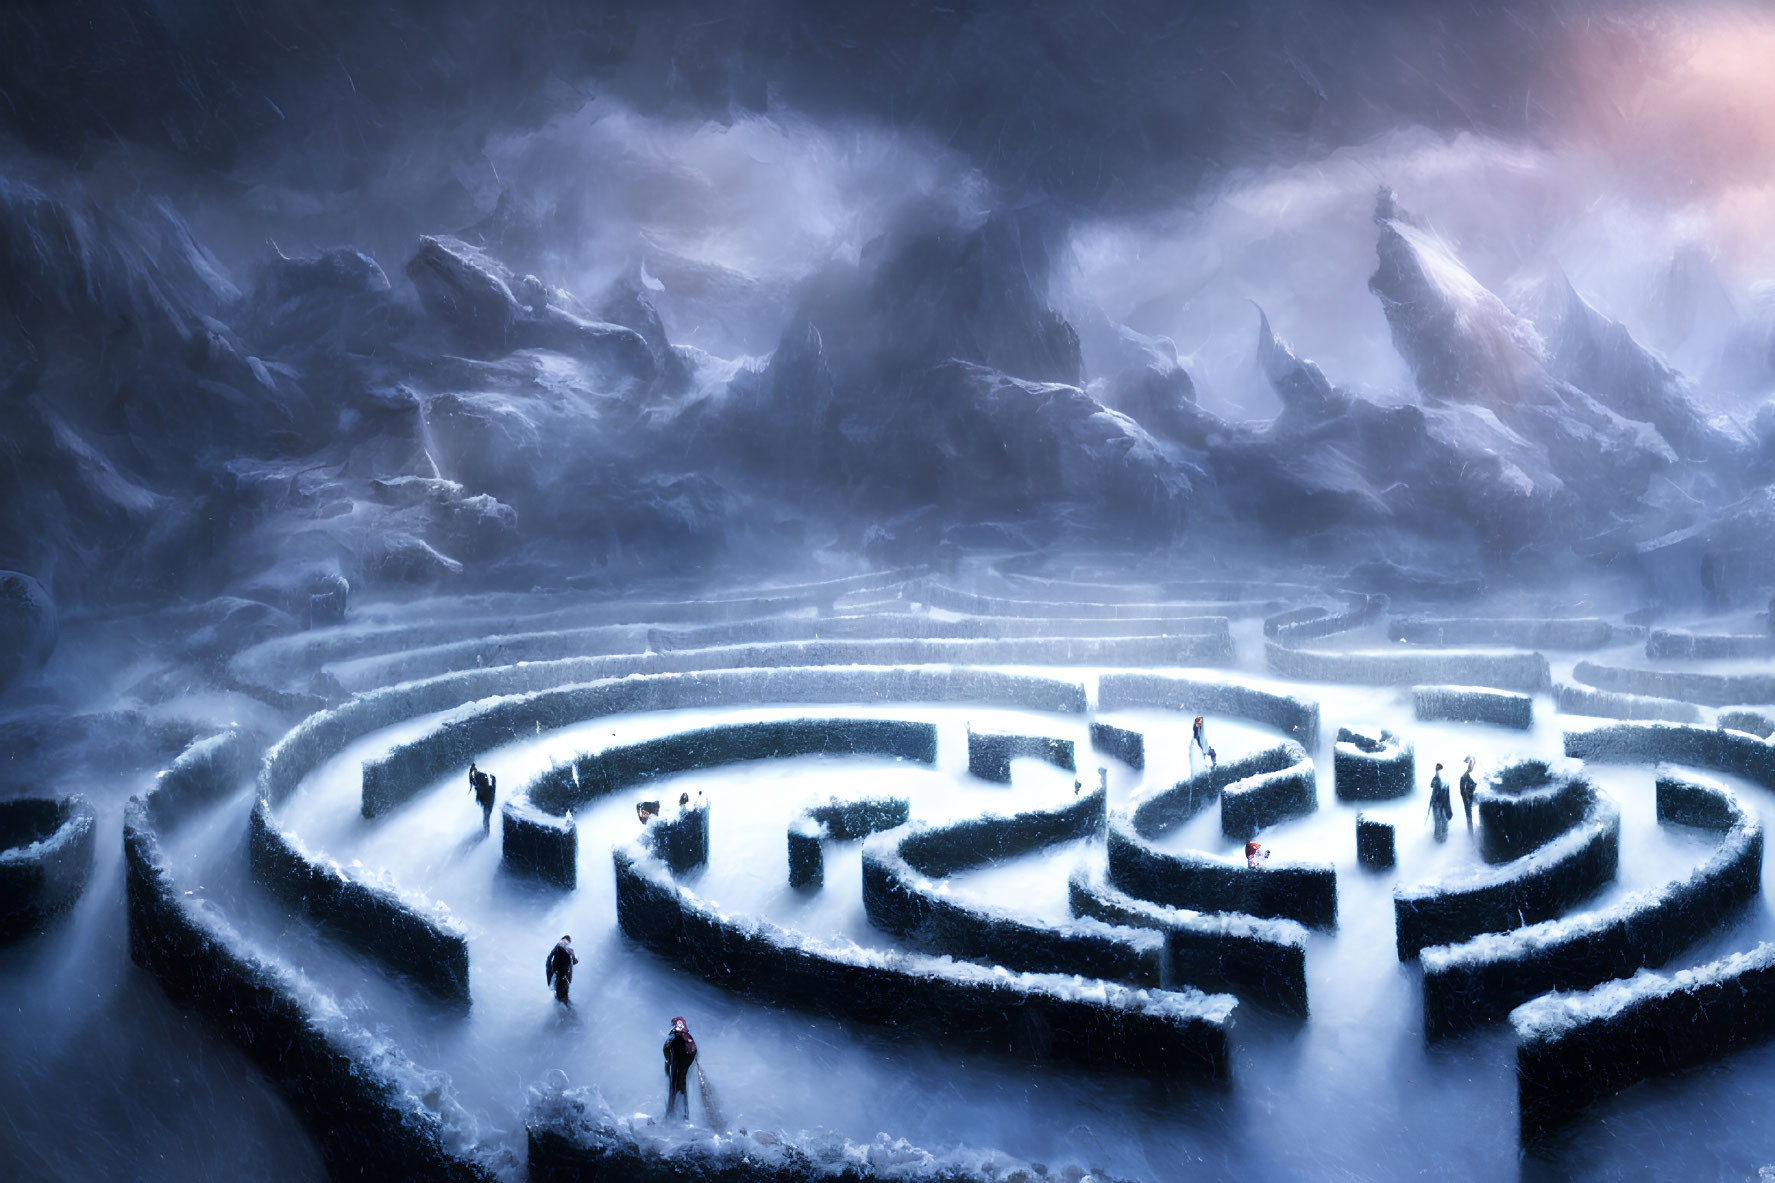 Fantasy icy labyrinth with people navigating snowy mountains under dramatic sky